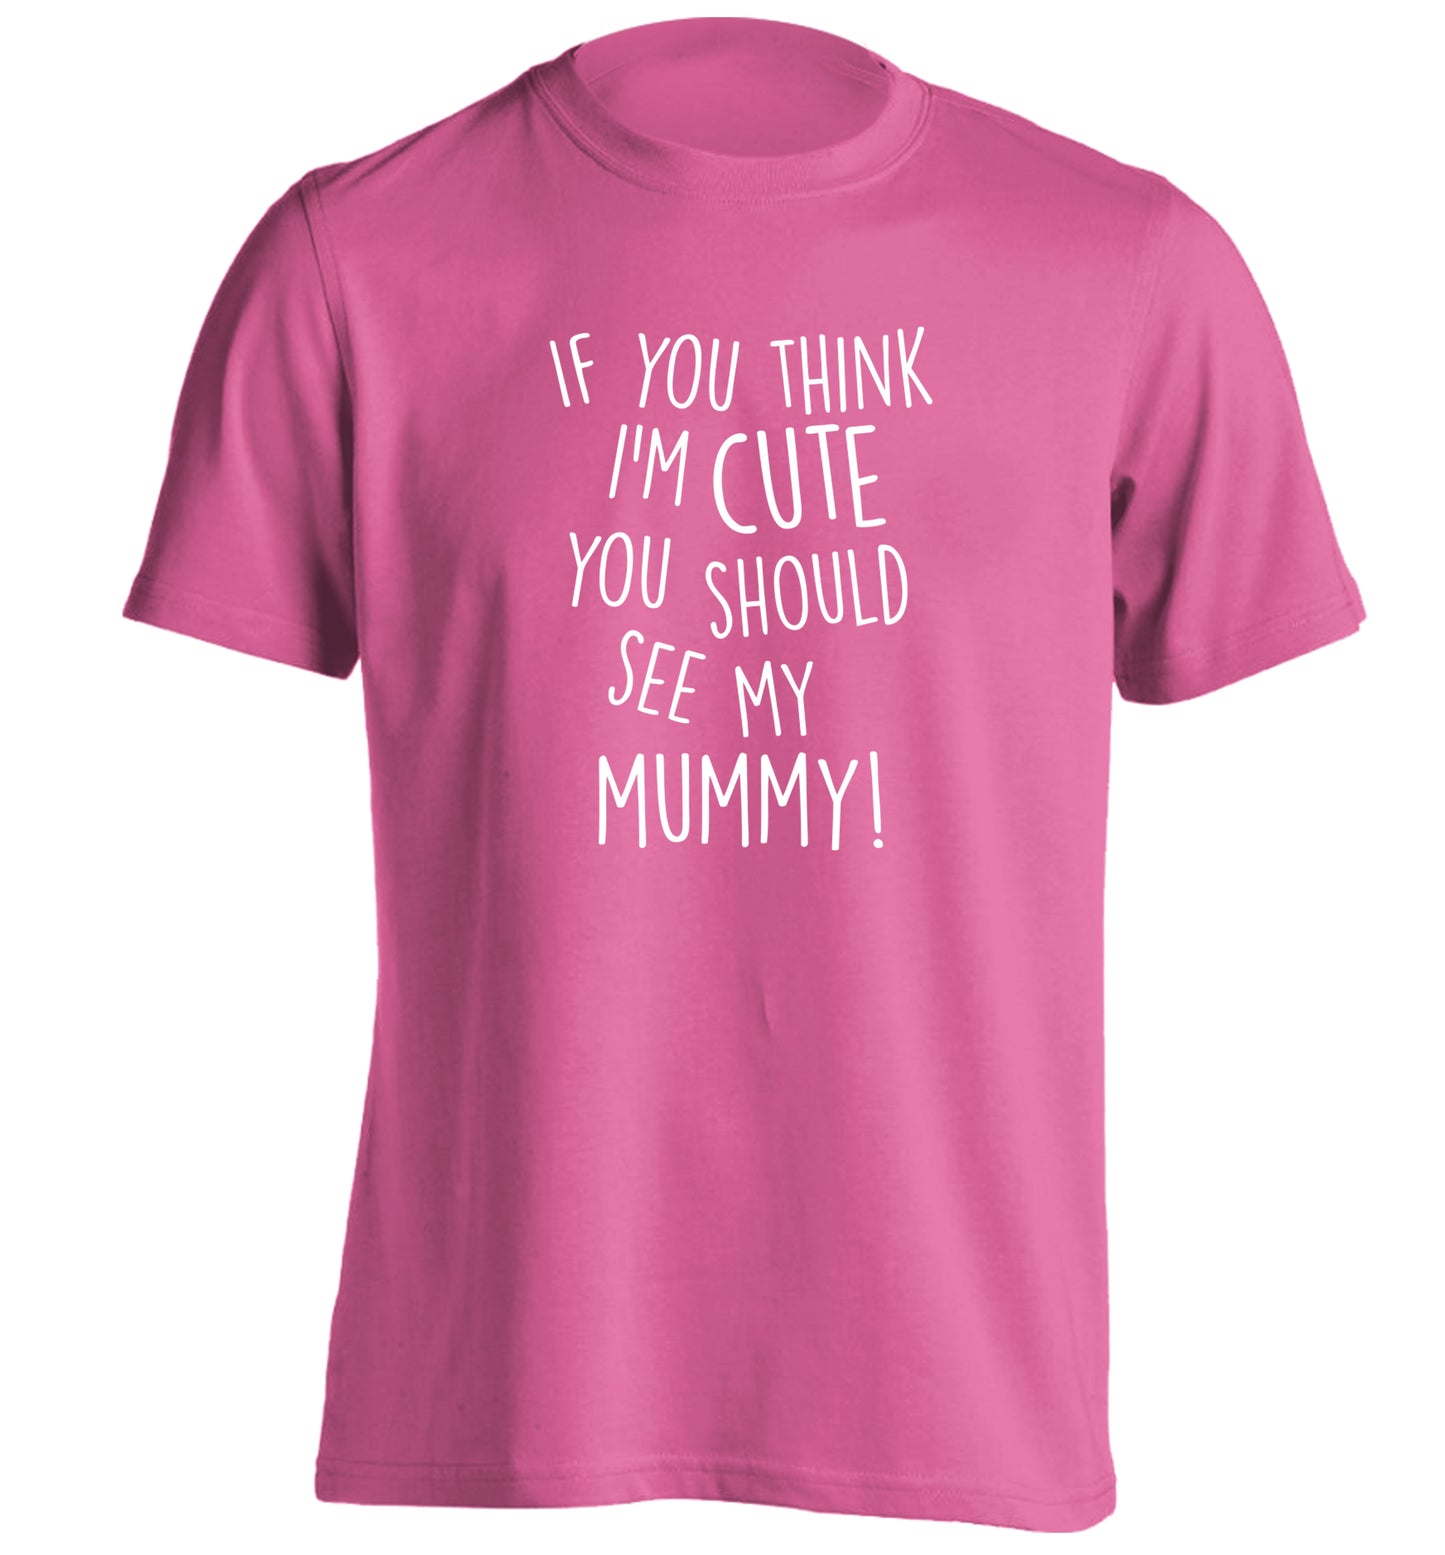 If you think I'm cute you should see my mummy adults unisex pink Tshirt 2XL